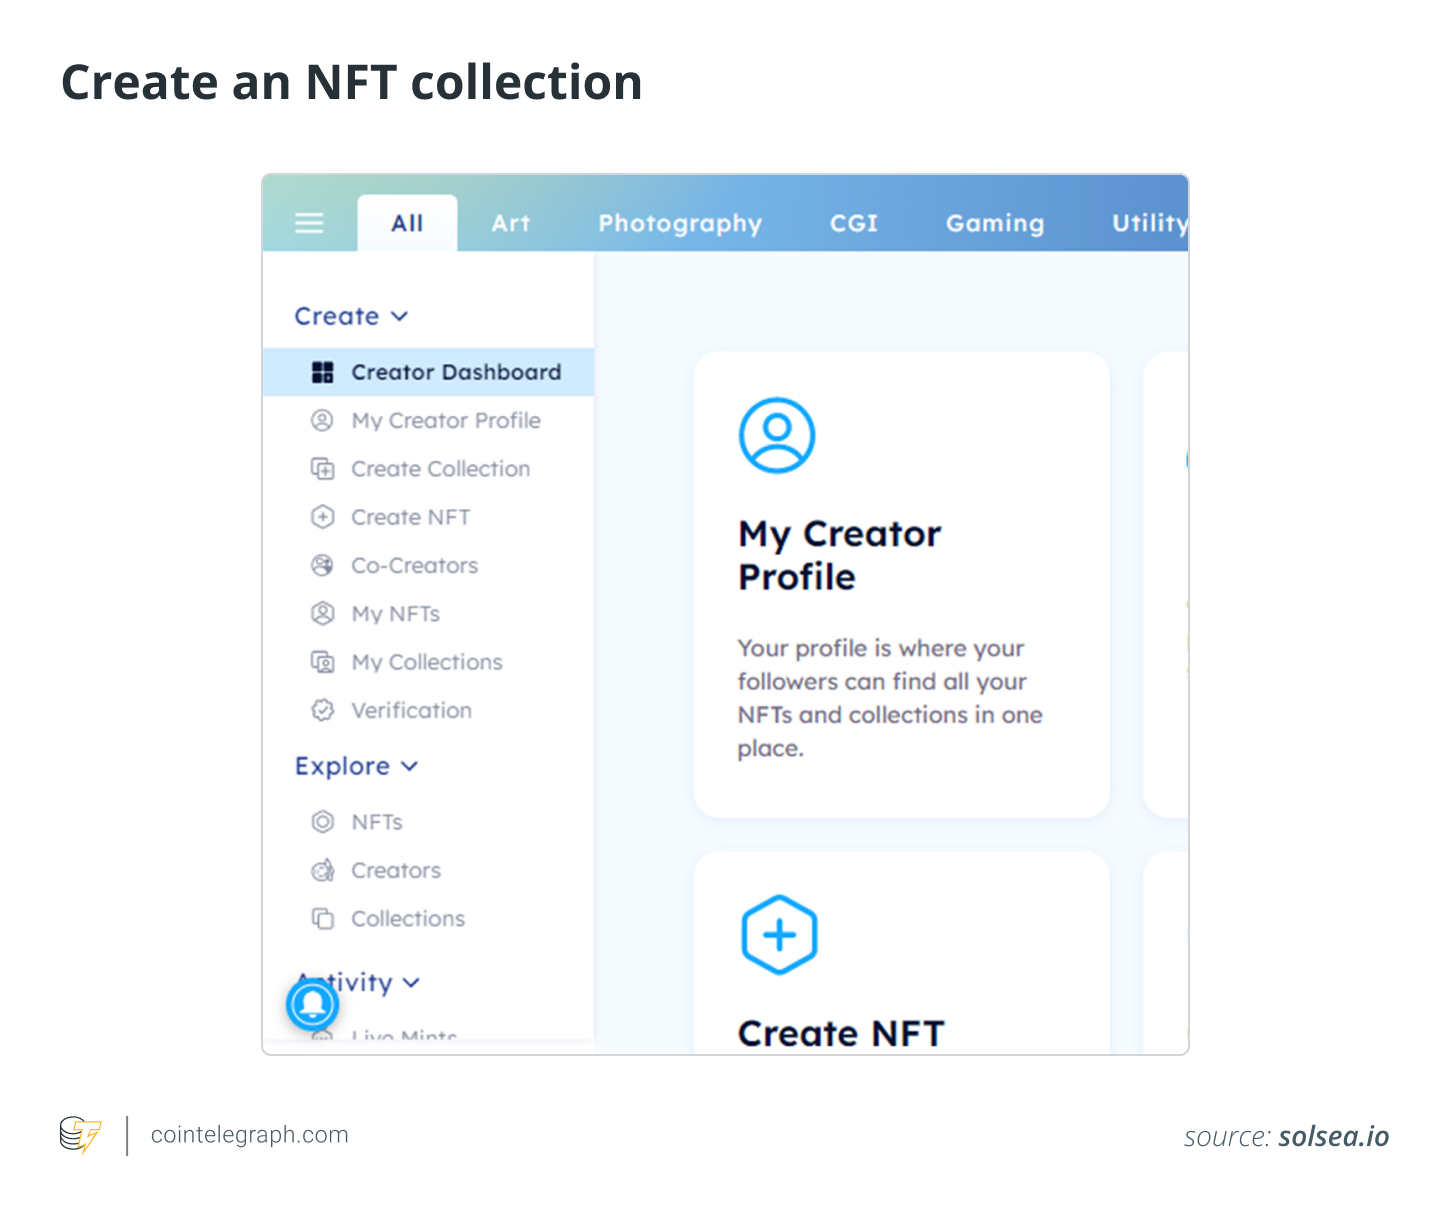 Create an NFT collection